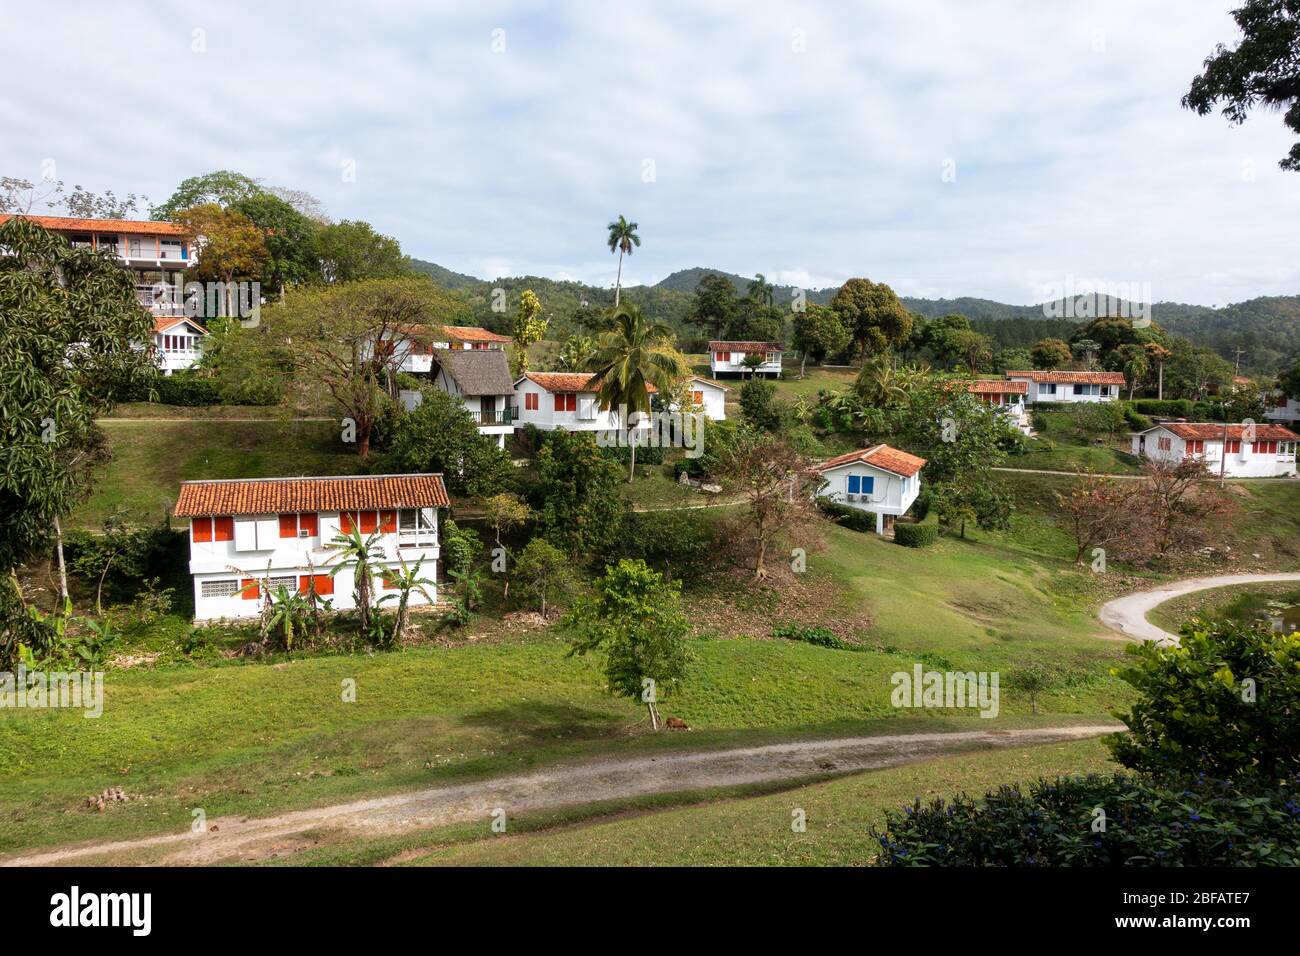 Looking over the Las Terrazas Complex apartments and villas with mountains beyond, Cuba Stock Photo